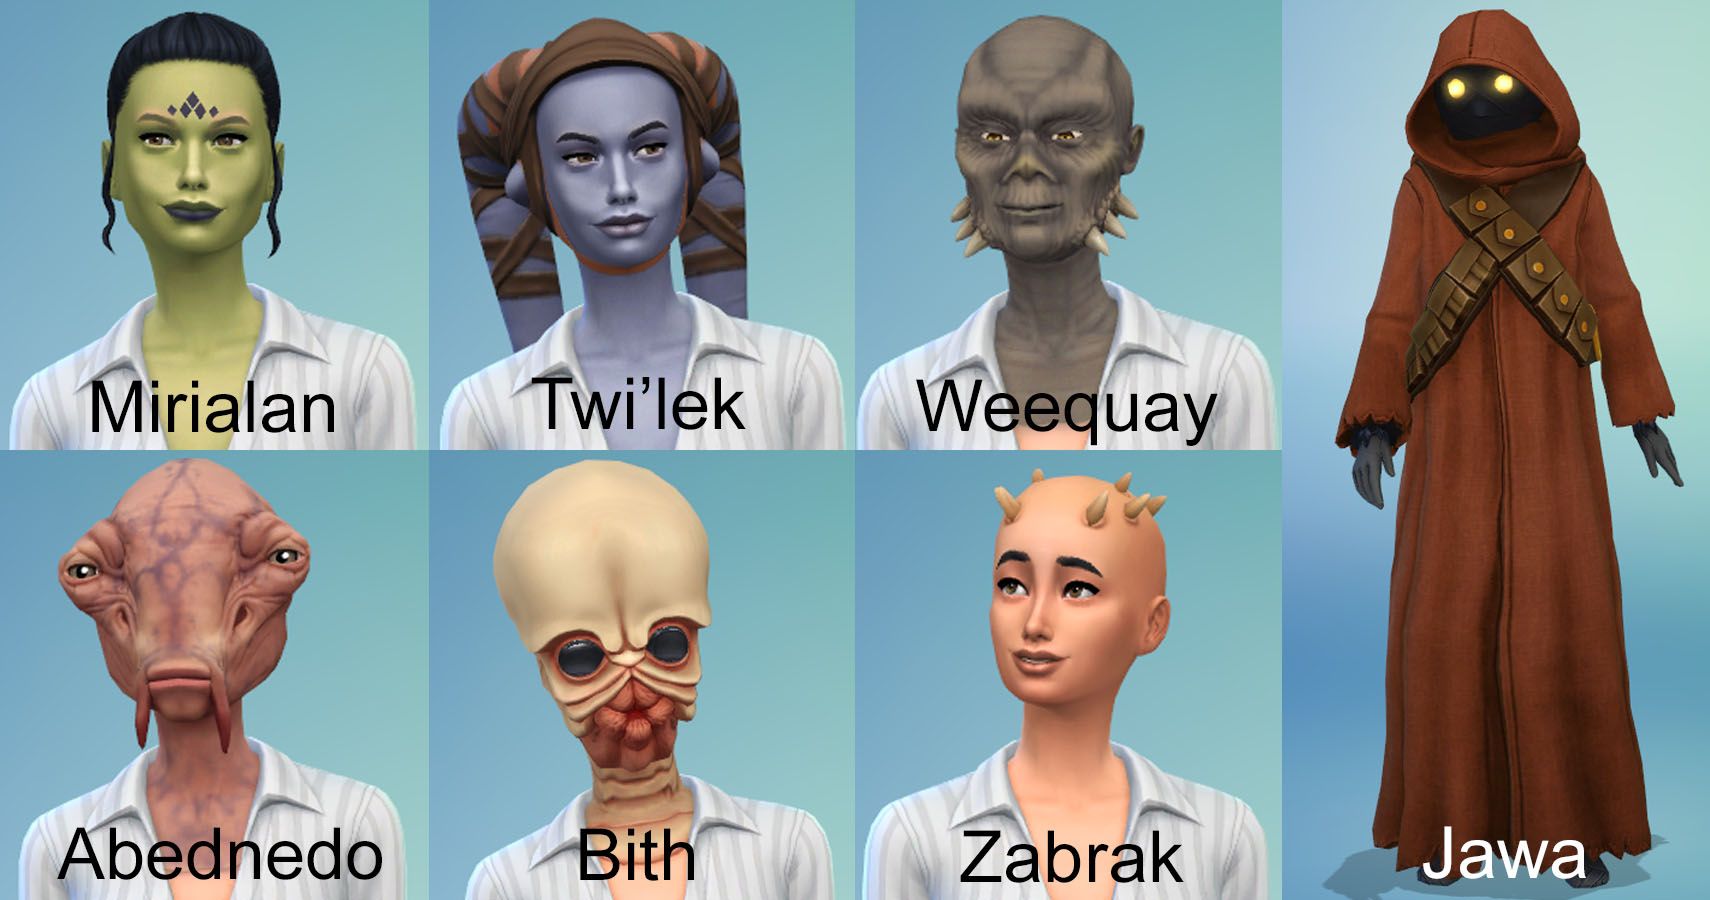 The seven alien races skins with their names underneath.